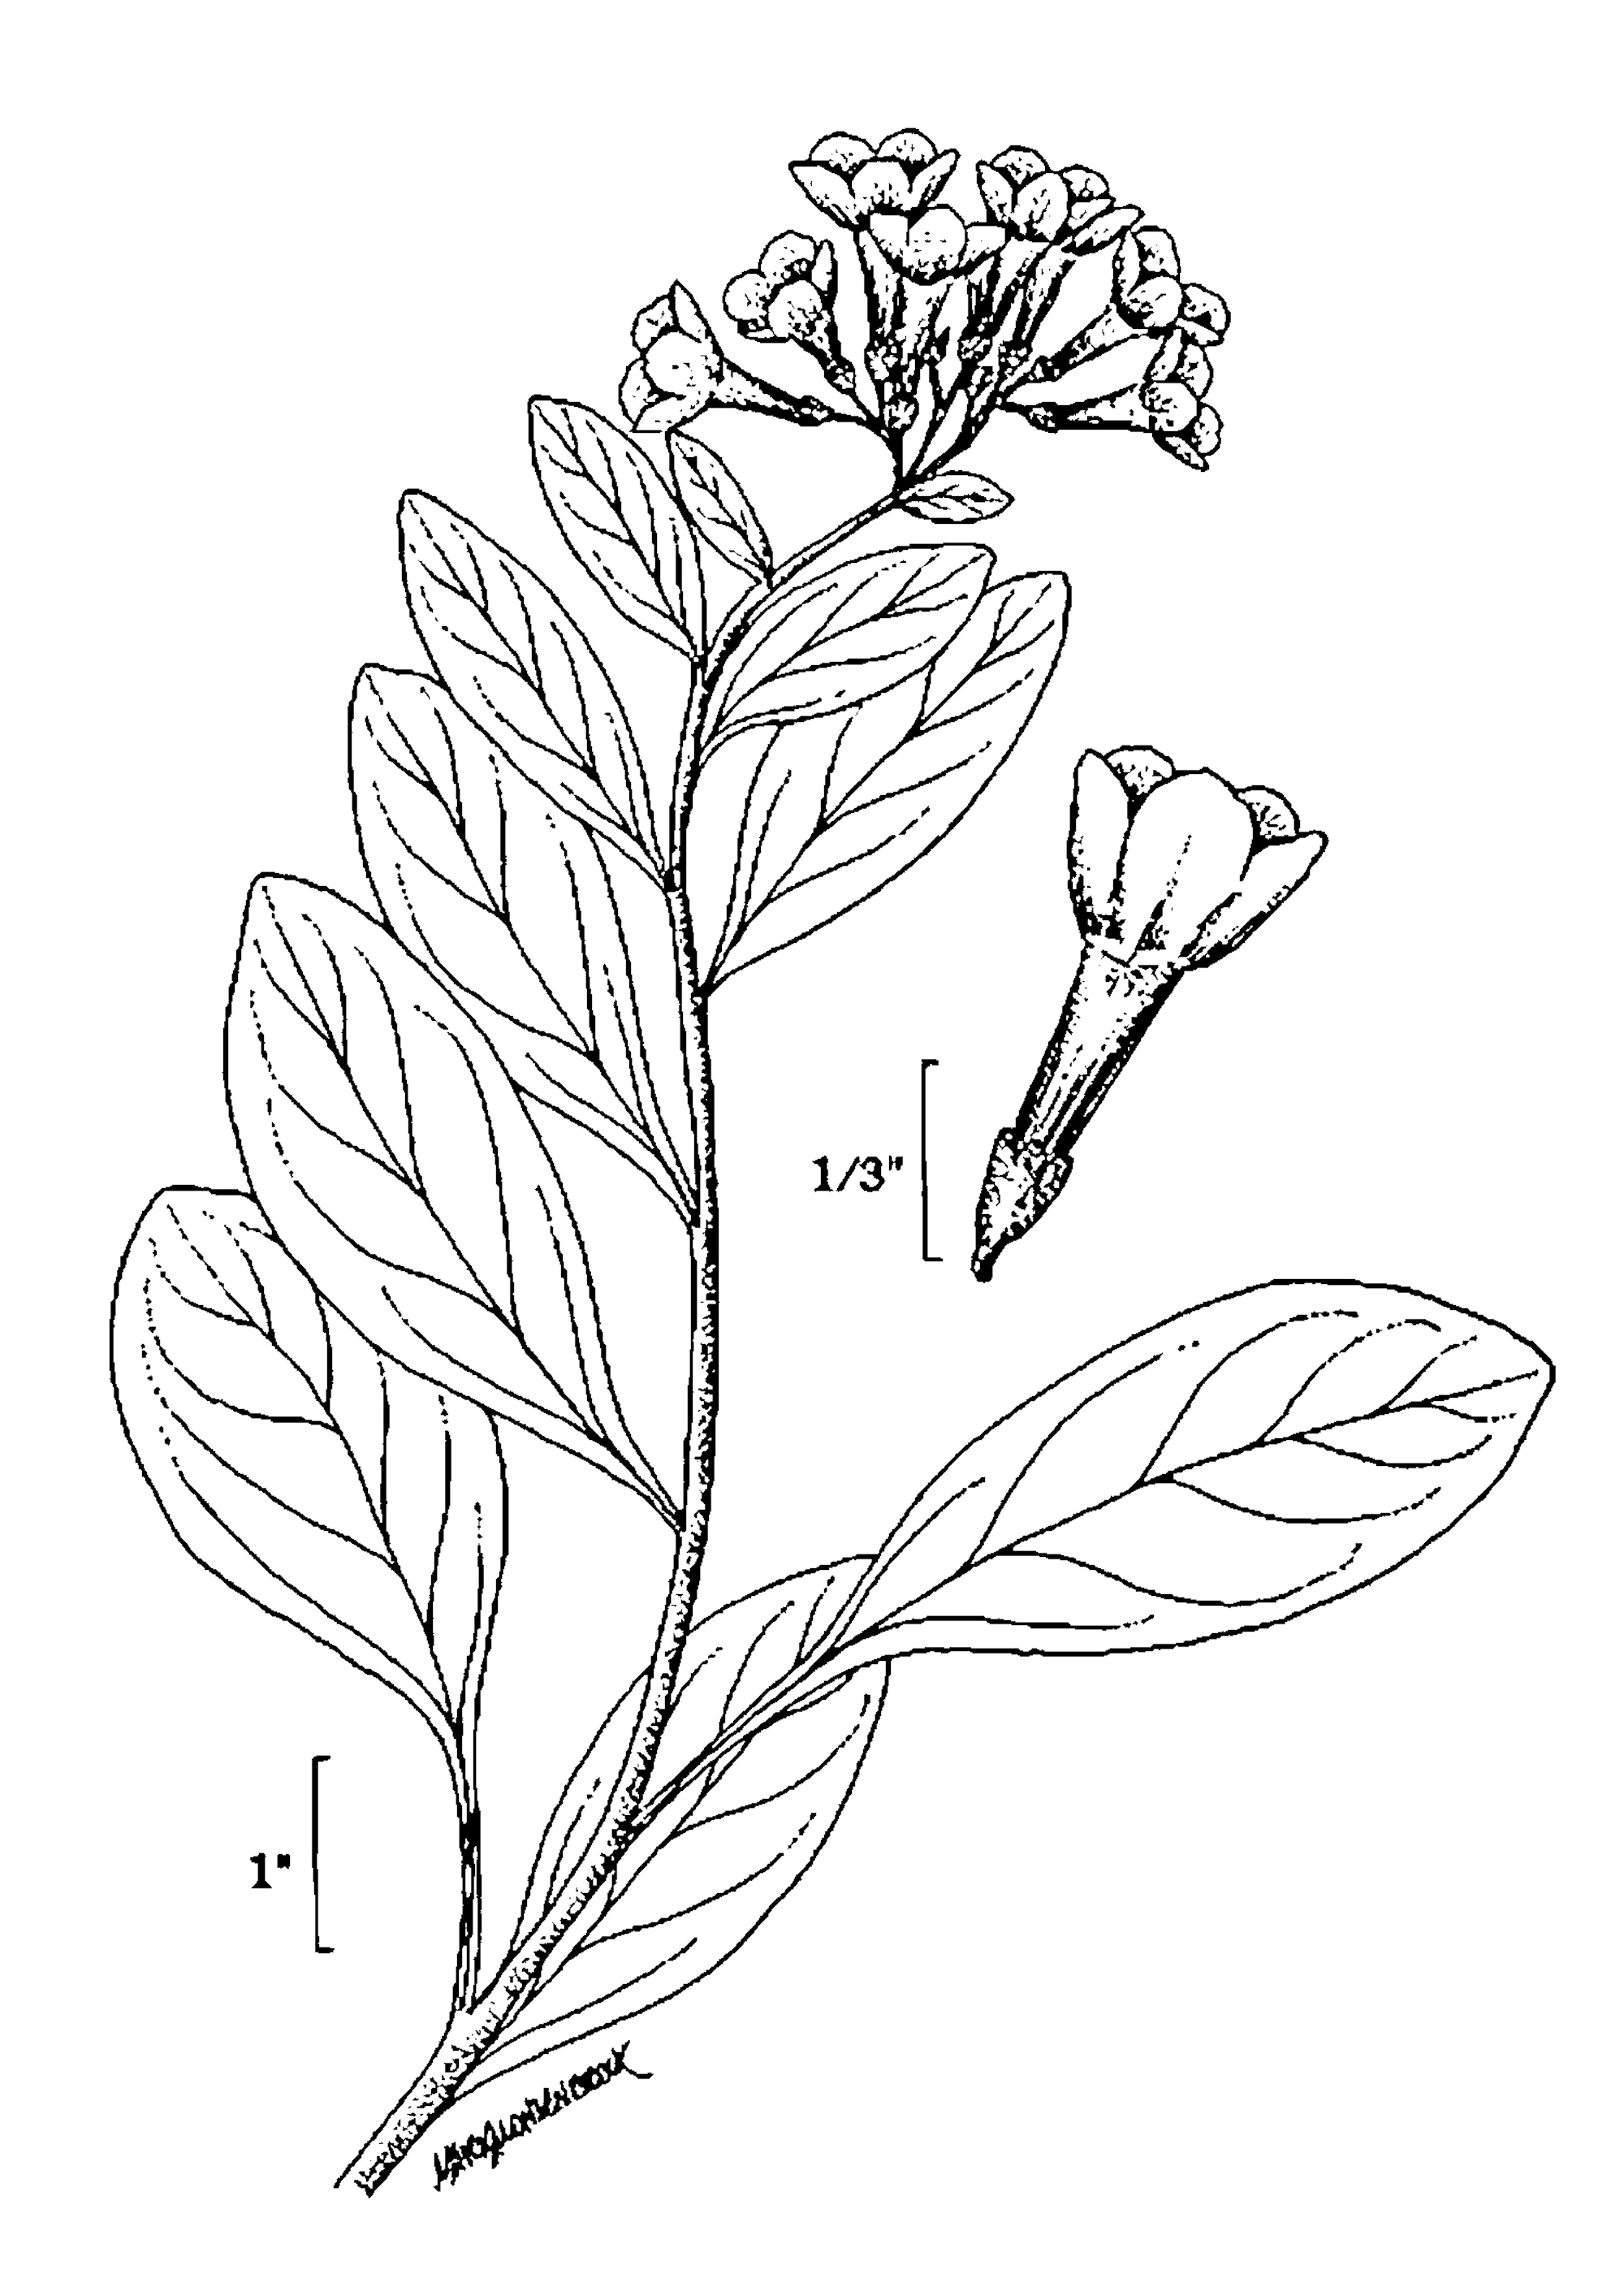 Virginia Bluebell botanical line drawing from USDA  NRCS, Wetland flora: Field office illustrated guide to plant species., USDA NRCS National Wetland Team.